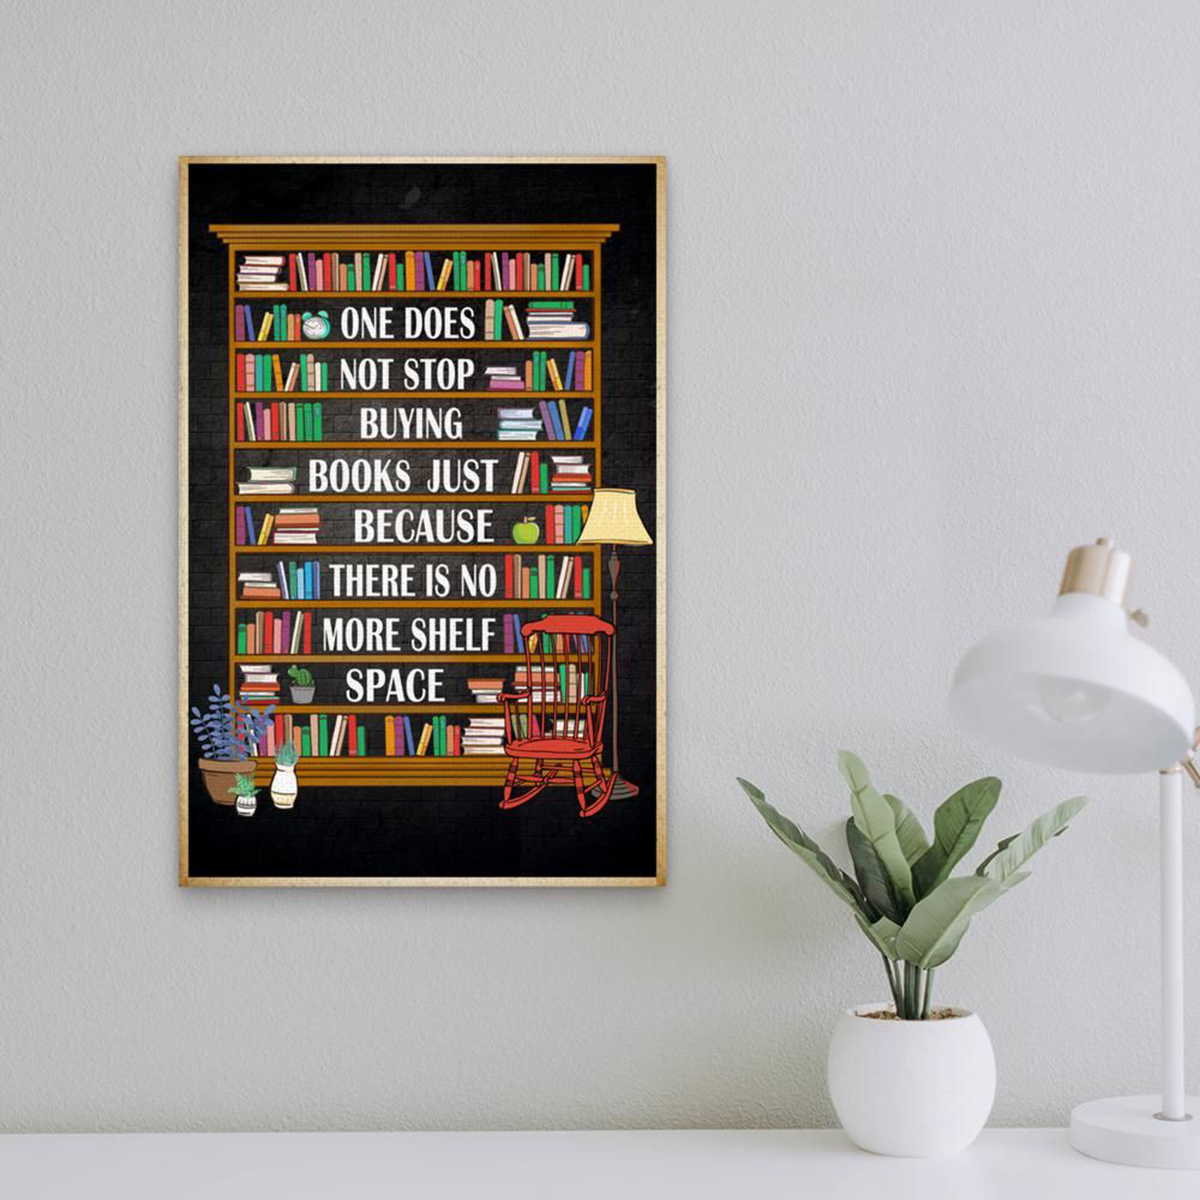 One does not stop buying books just because there is no more shelf space poster